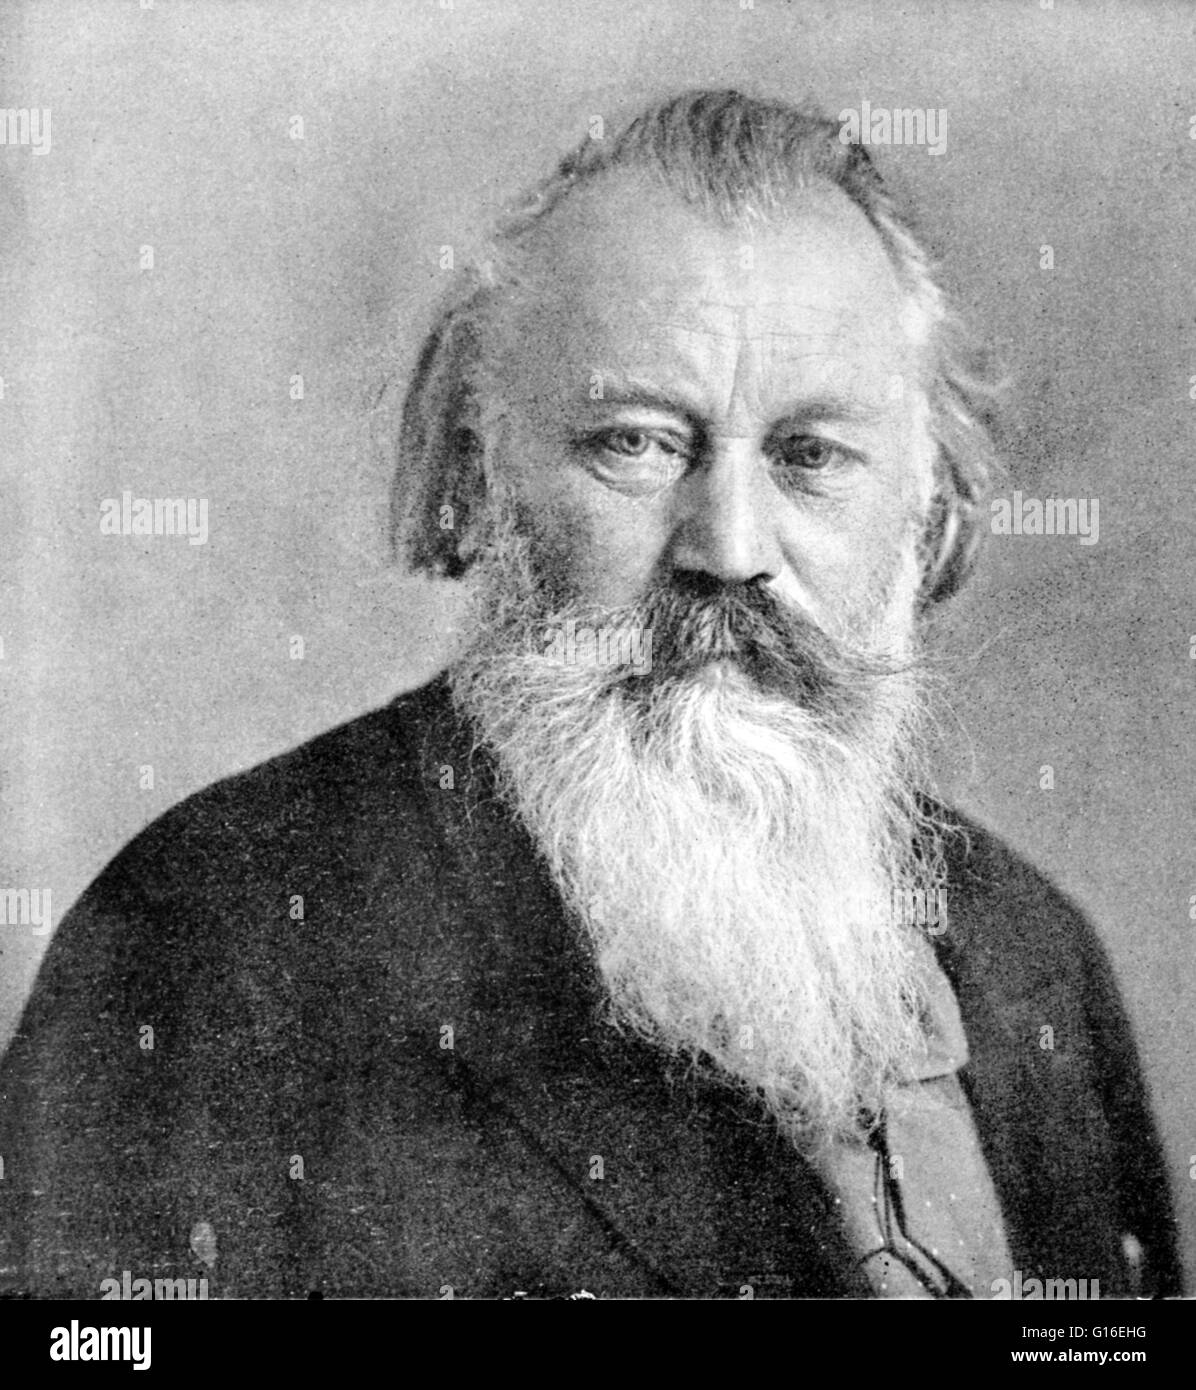 Johannes Brahms (May 17, 1833 - April 3, 1897) was a German composer and pianist, and one of the leading musicians of the Romantic period. Brahms spent much of his professional life in Vienna, Austria, where he was a leader of the musical scene. In his li Stock Photo